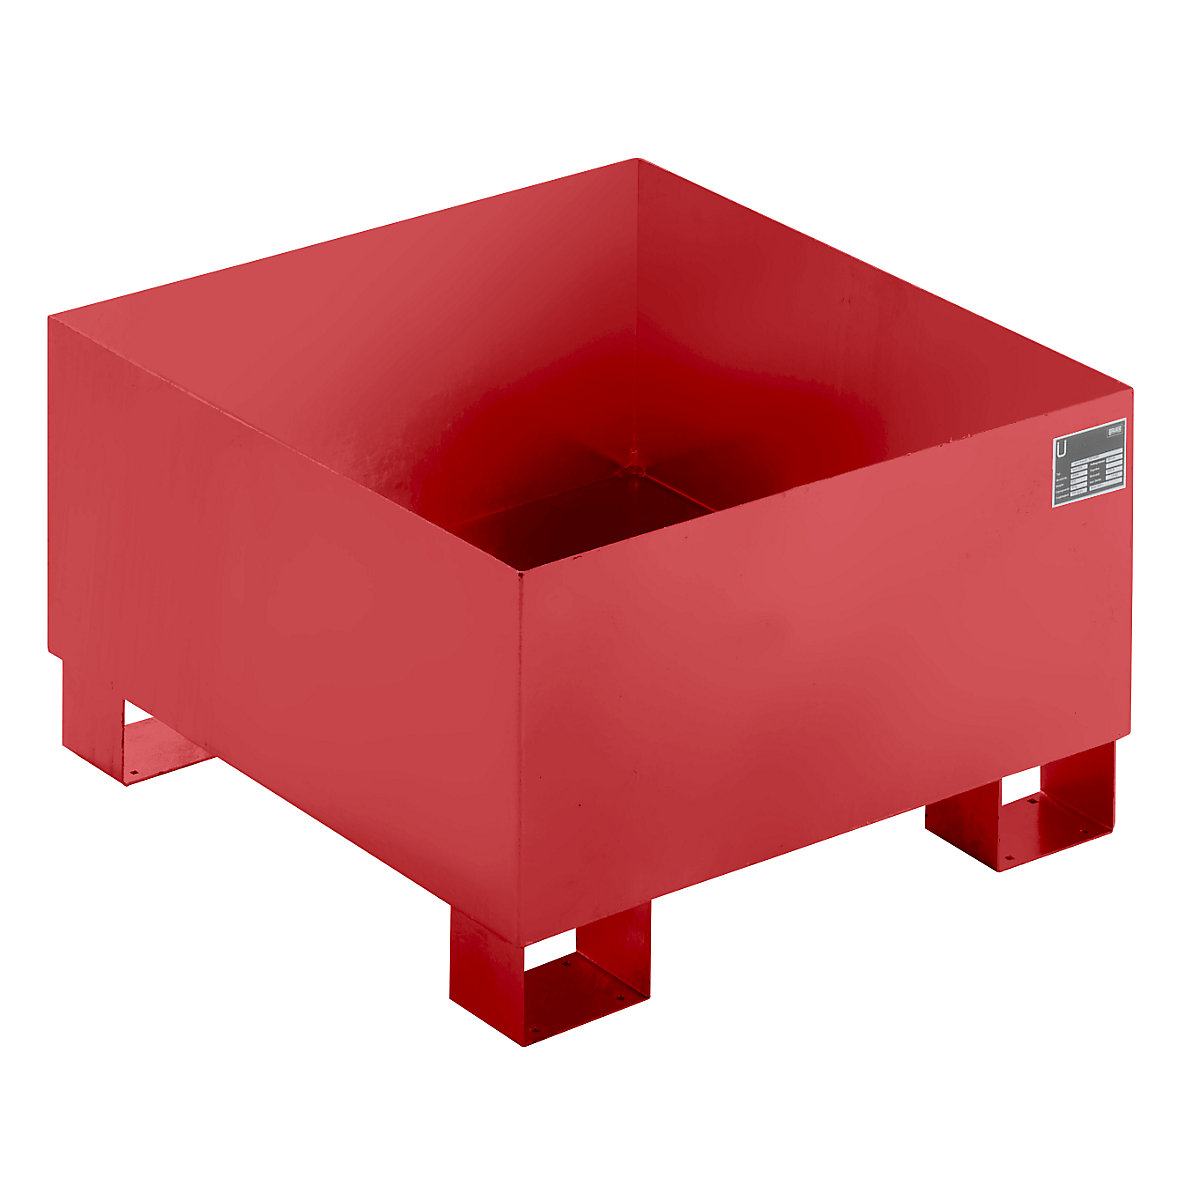 EUROKRAFTbasic – Sump tray made from sheet steel, LxWxH 800 x 800 x 465 mm, red RAL 3000